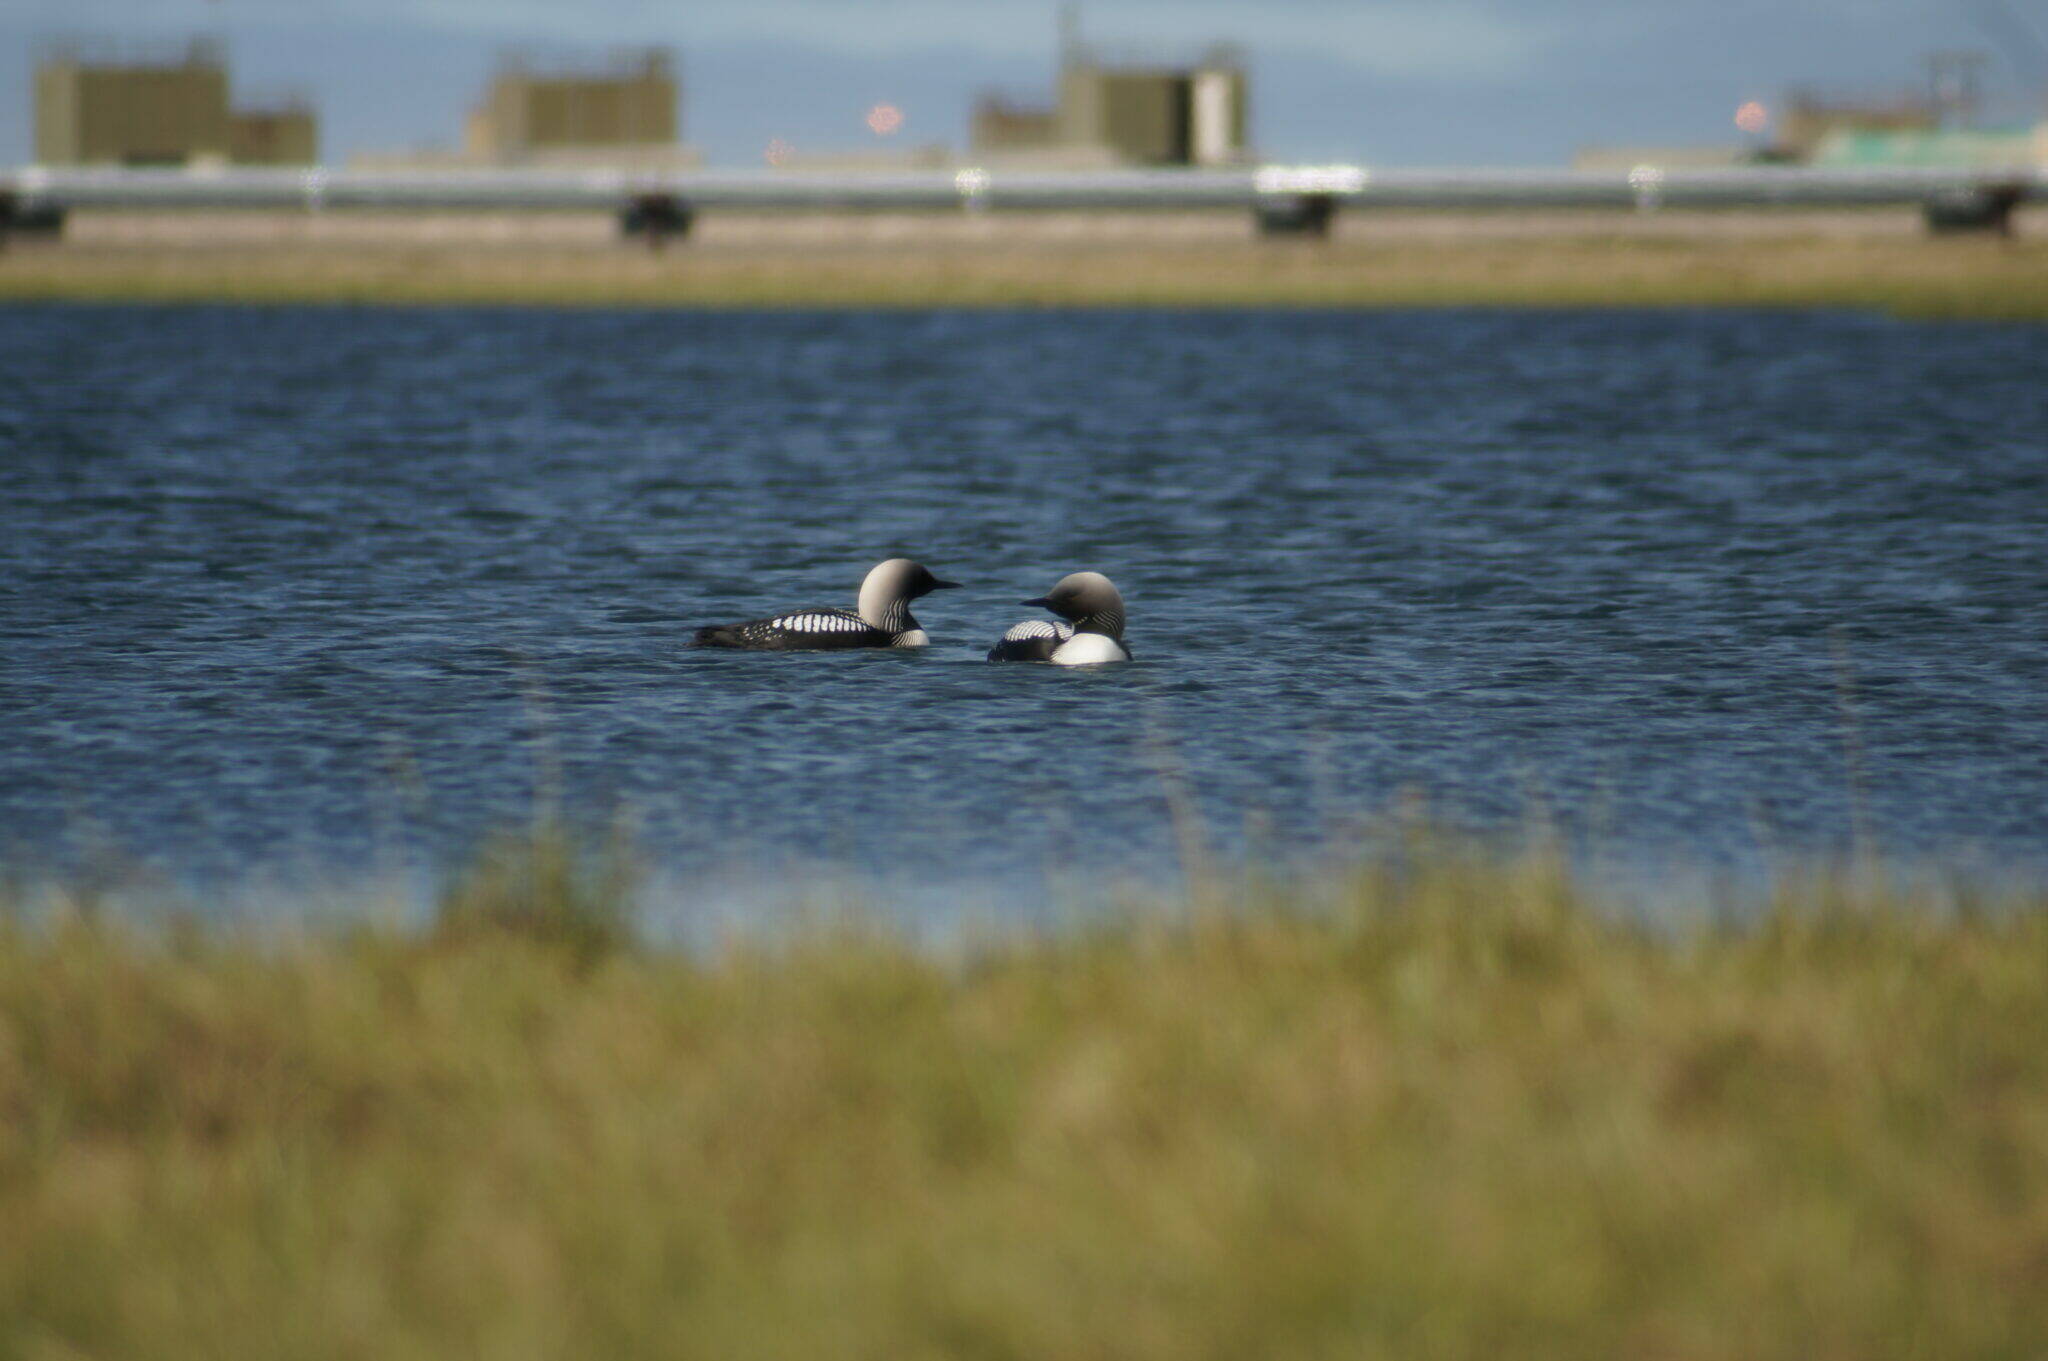 Loons swim near a pipeline and other oil field infrastructure at the Greater Prudhoe Bay Unit on Alaska’s North Slope in this undated photo. A new study finds that nest survival is lower for birds closer to high-use infrastructure. (Photo by Kayla Scheimreif/Wildlife Conservation Society)